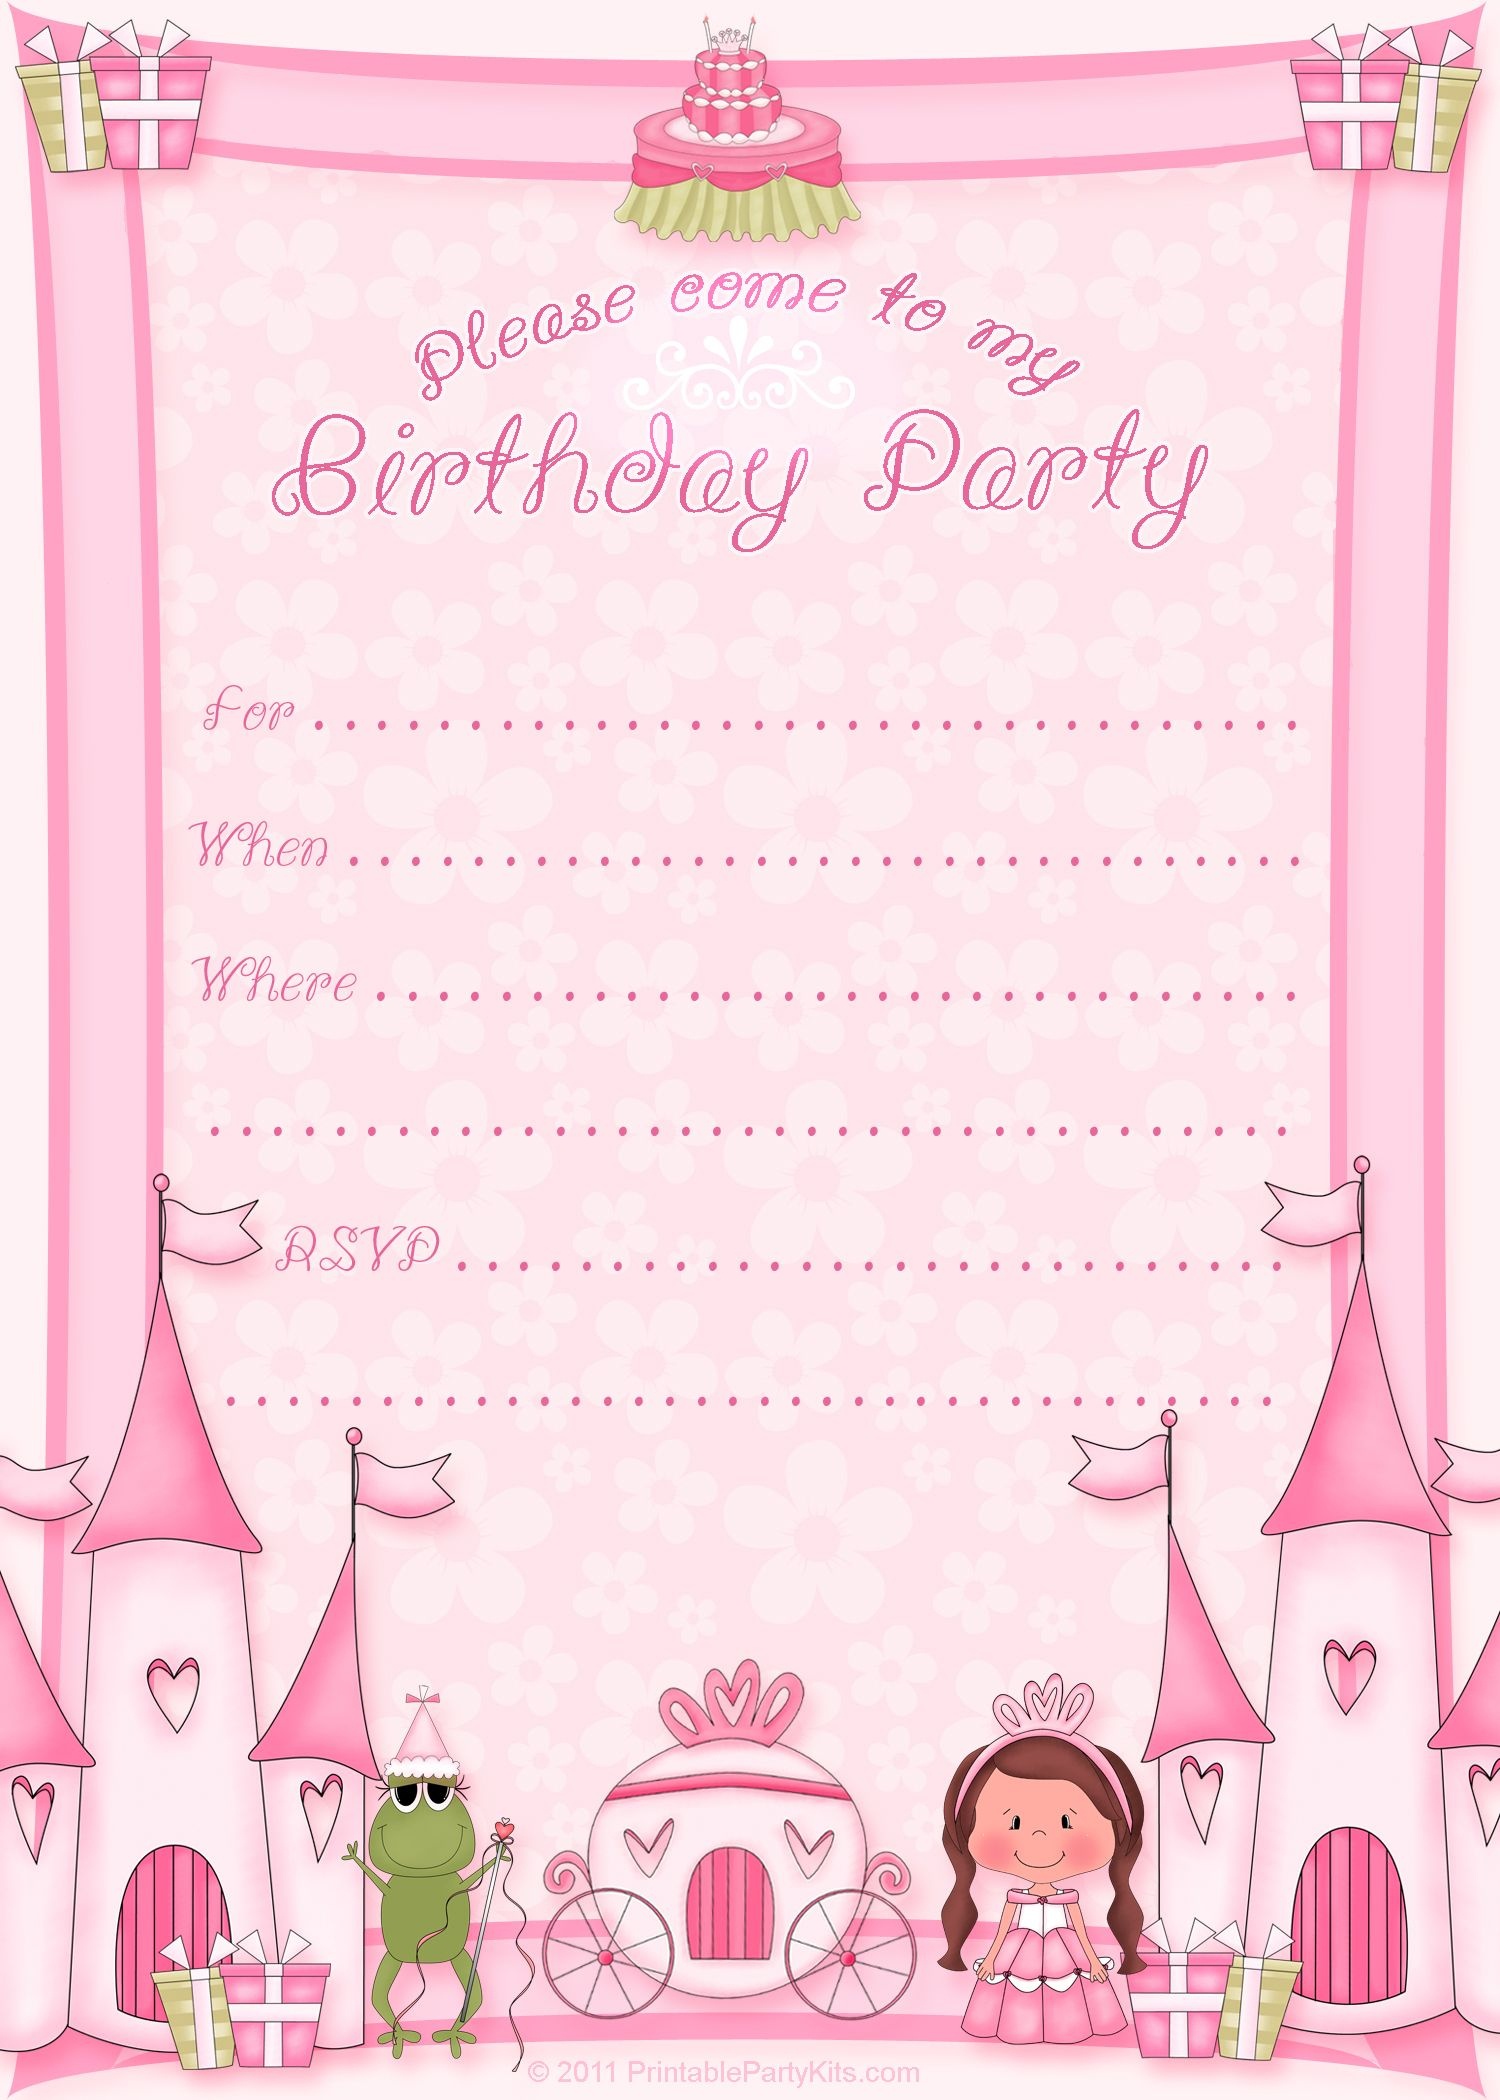 Free Printable Invitation. Pinned For Kidfolio, The Parenting Mobile - Free Printable Princess Invitation Cards